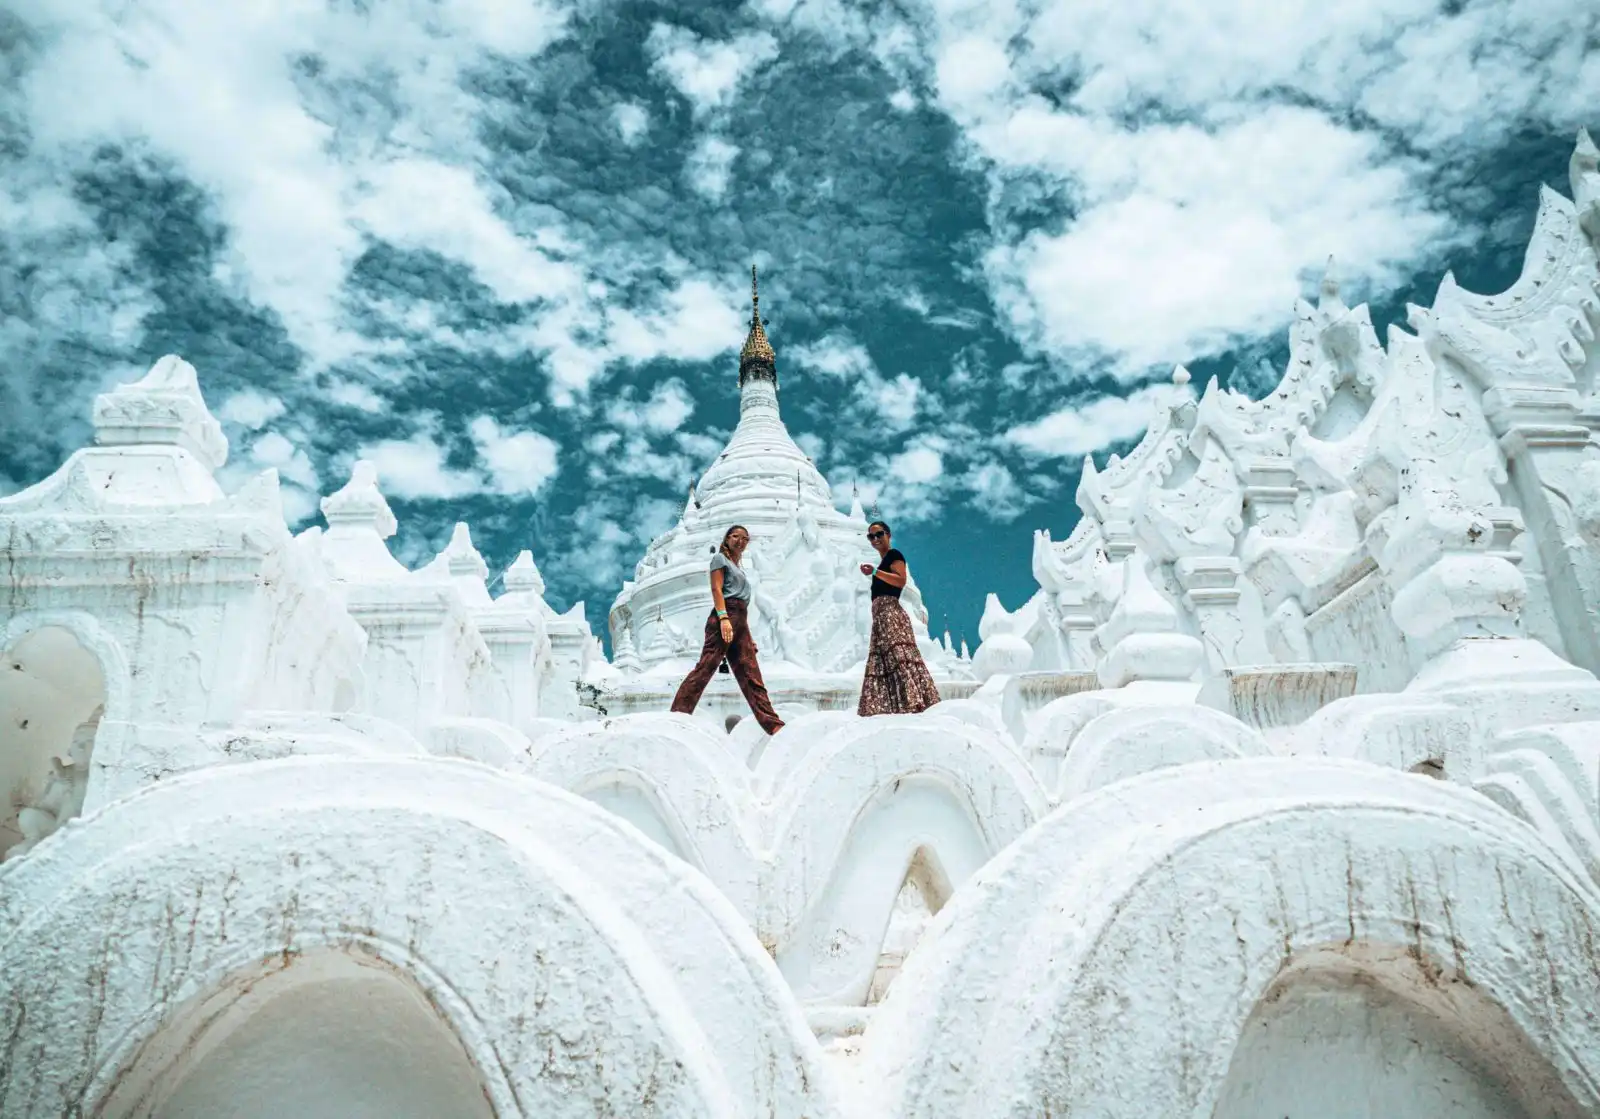 Picture of the white pagoda in Mingun, Mandalay